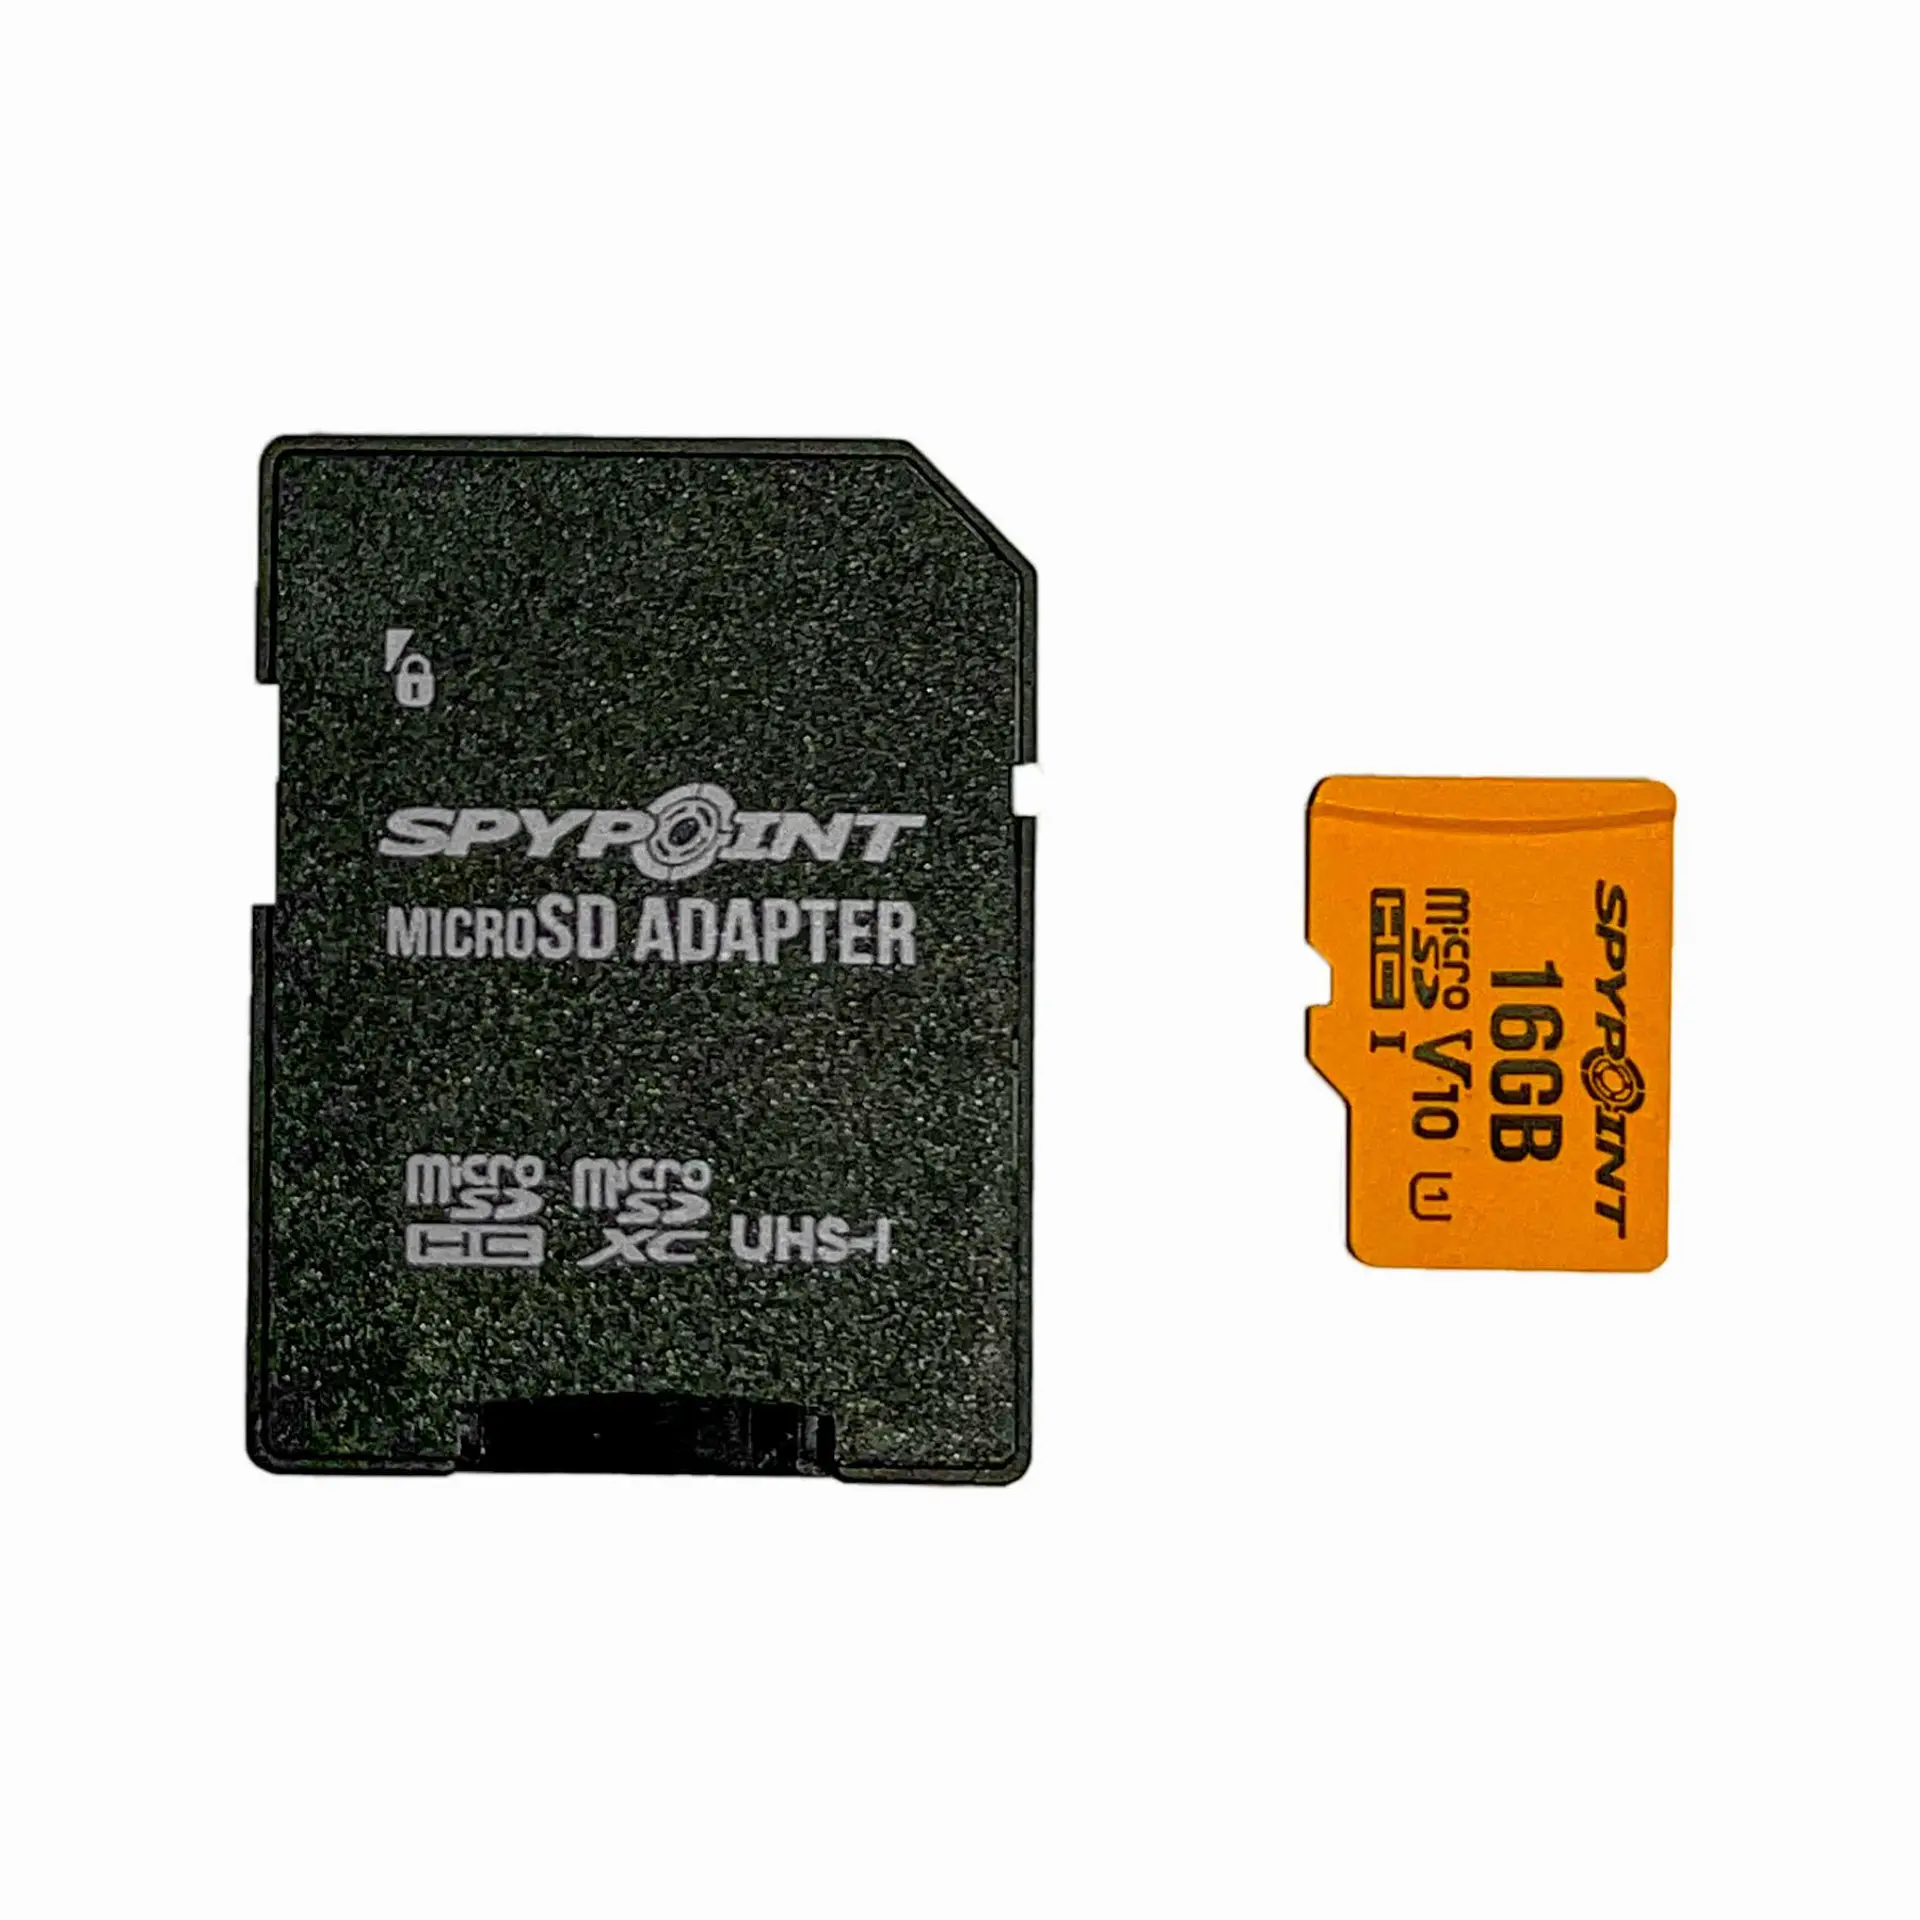 SPYPOINT Micro-SD 16GB